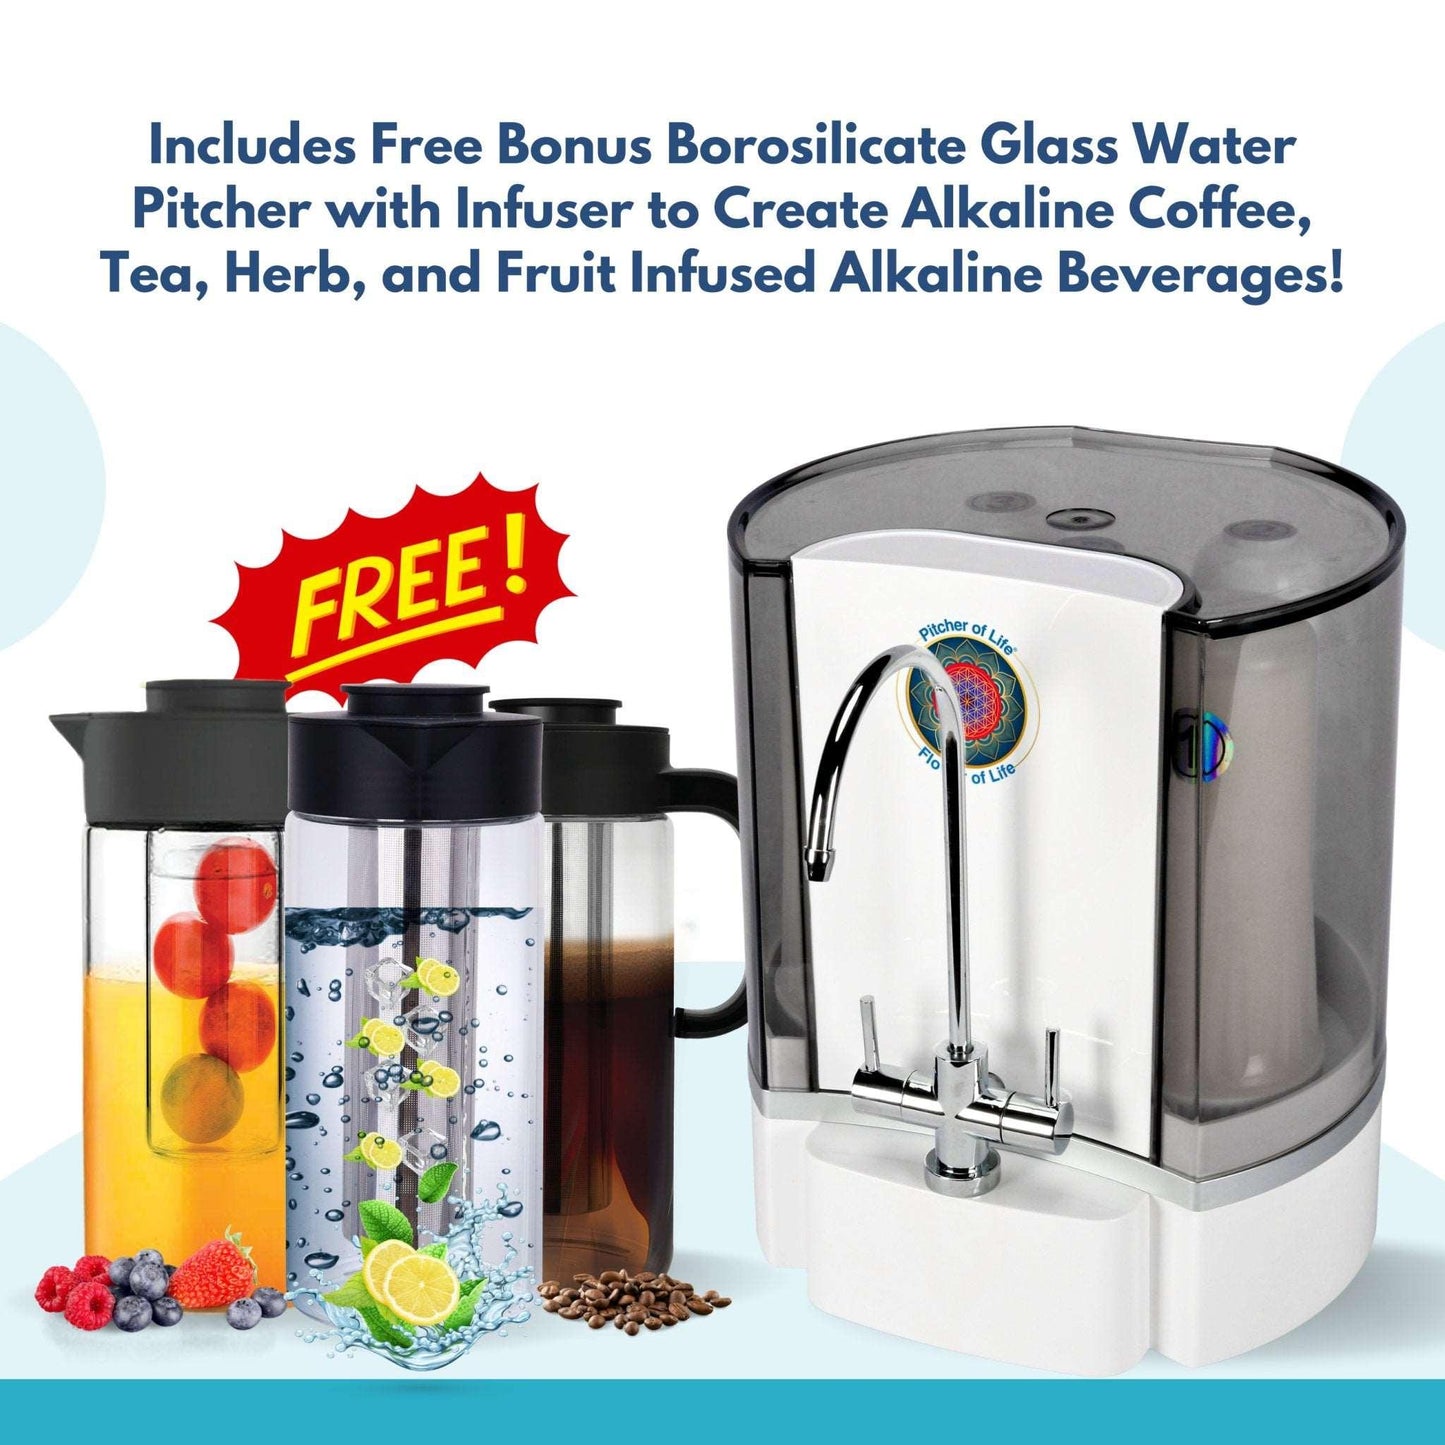 Life Sciences Hydrogen Alkaline Bio Energy Water System Includes Free Bonus Life Borosilicate Glass Water Pitcher with Infuser